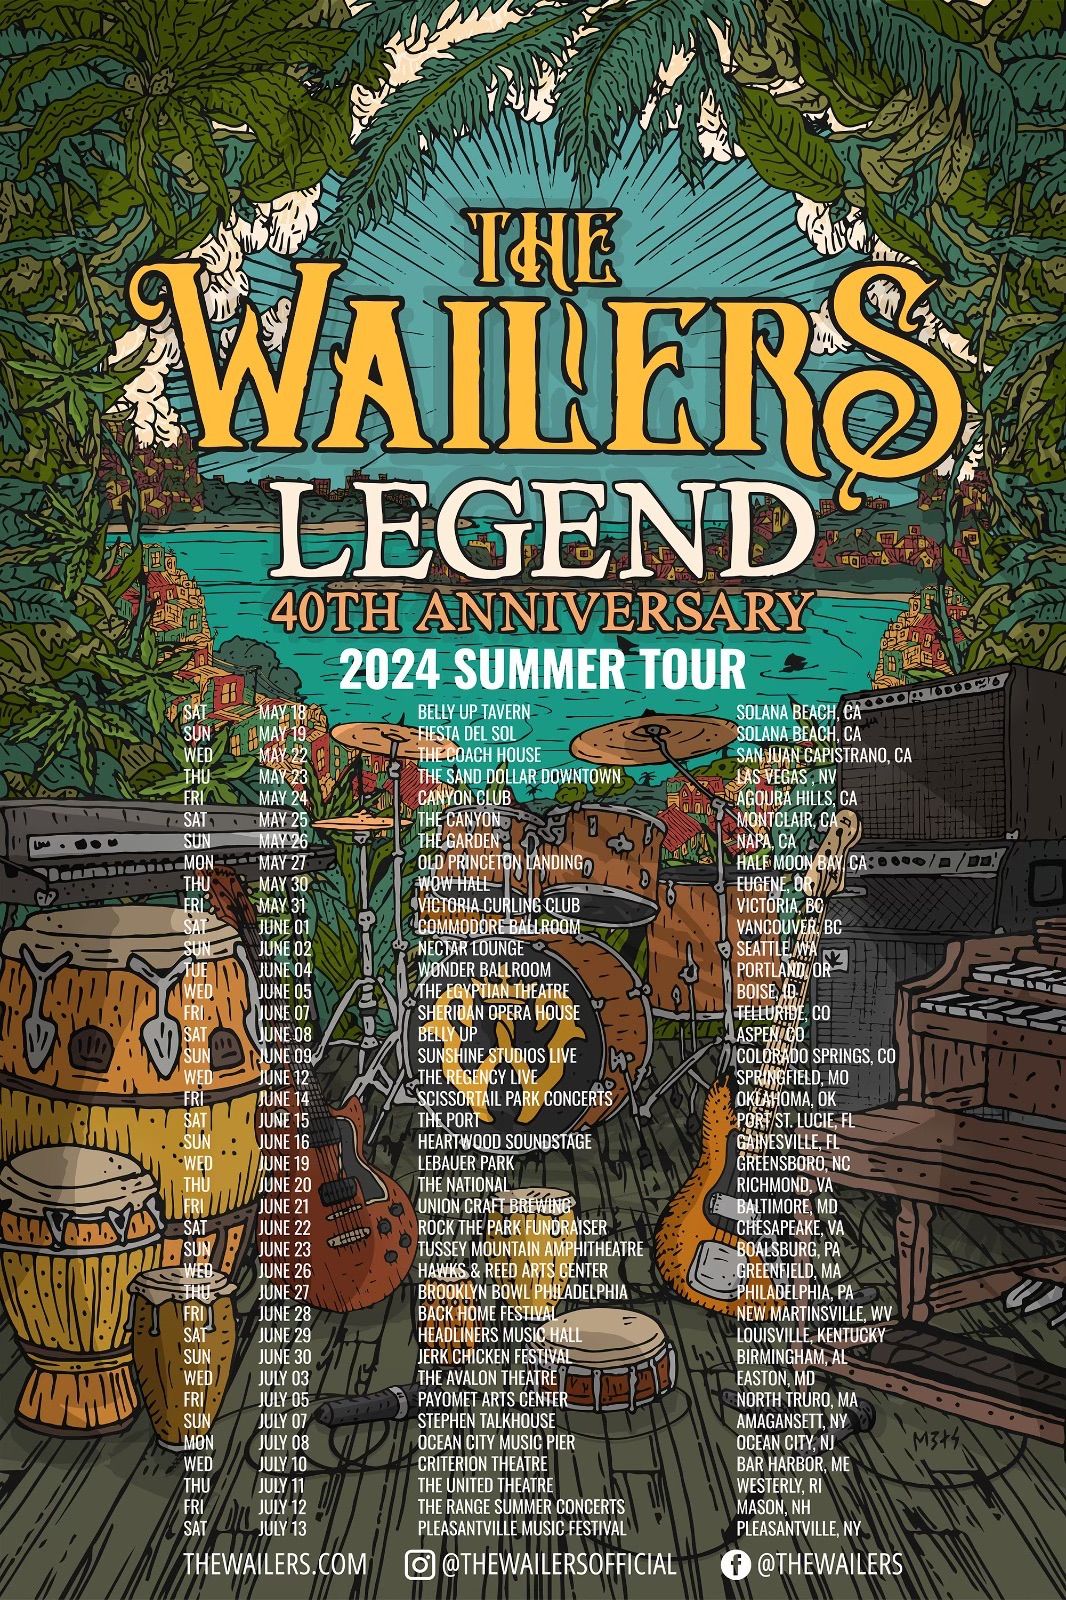 The Wailers 40th Anniversary Legend Tour @ The Wowhall, Eugene OR